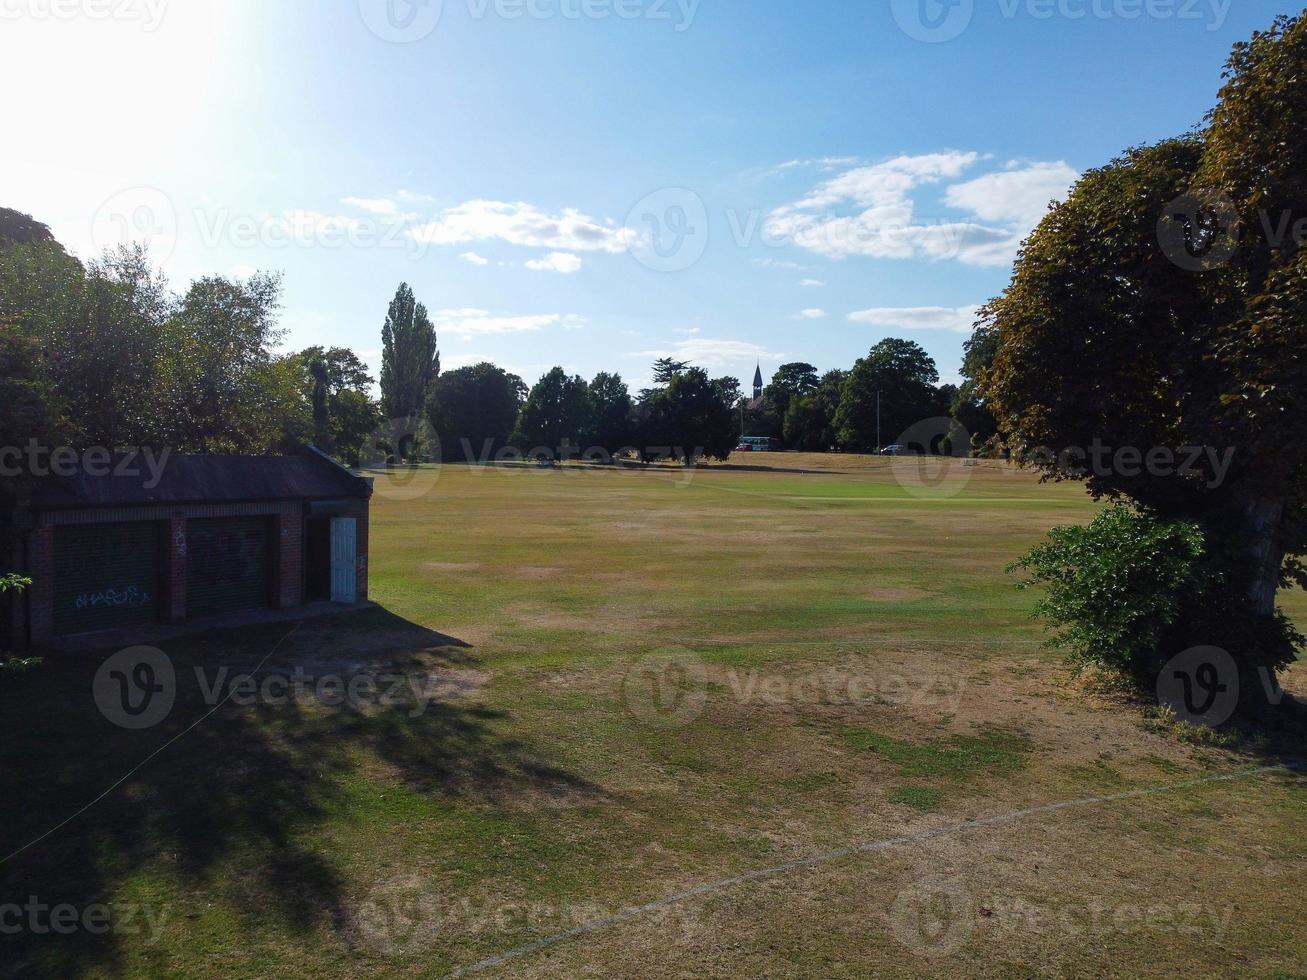 Aerial View of Cricket Ground at Local Public Park of Hemel Hempstead England Great Britain photo